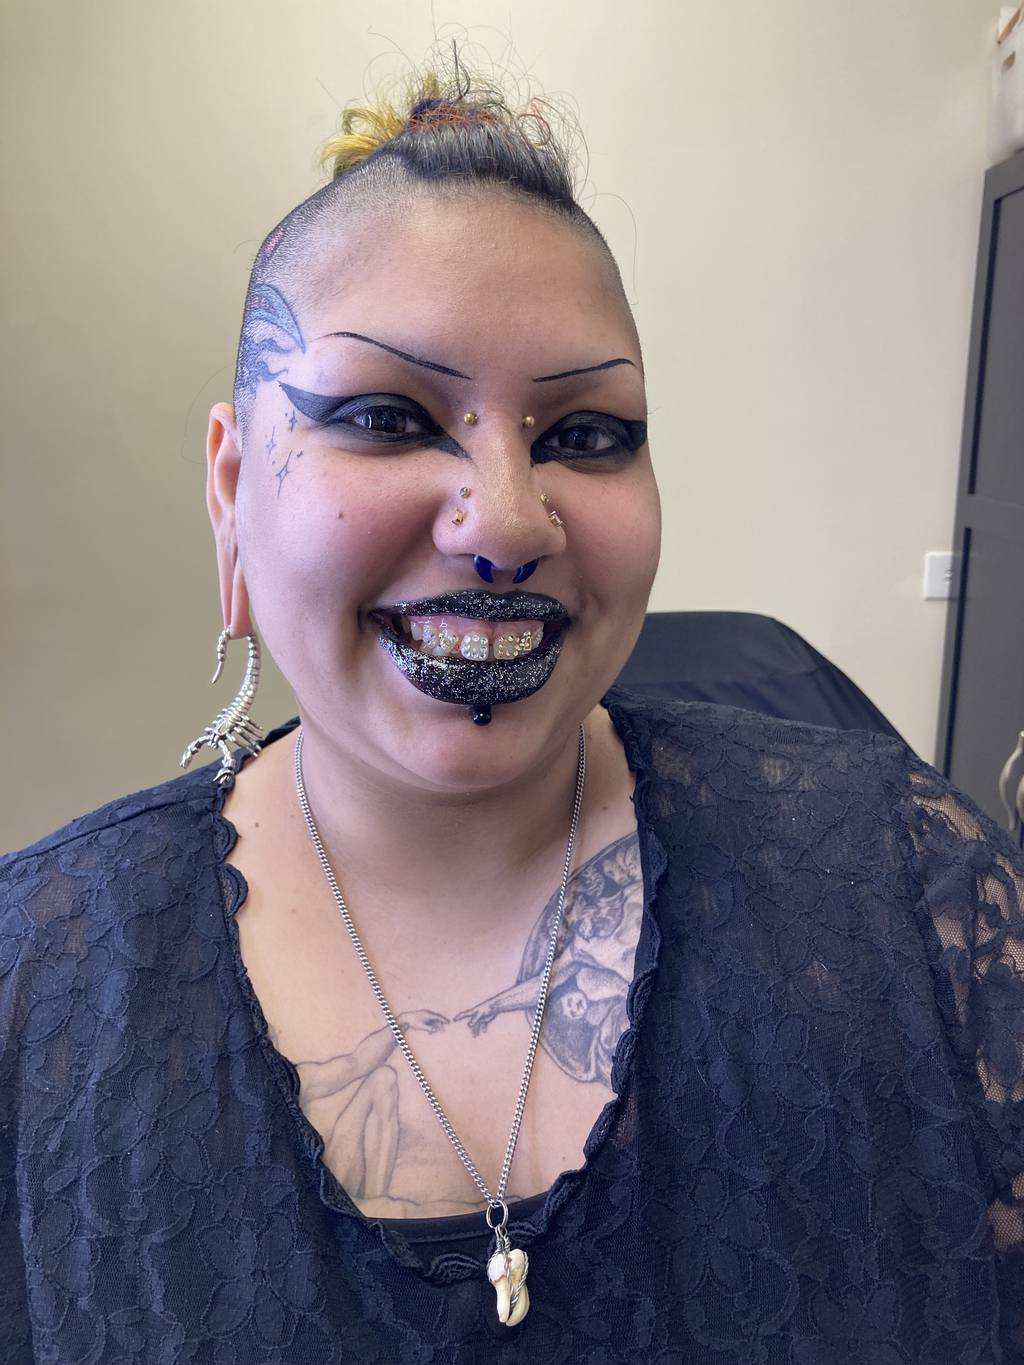 Michelle Sanchez shows off her tooth gems with a big smile after cosmetologist Libby Kerfman applied sparkly lip gloss to add even more shine to the overall look. Her front two teeth have chandelier designs, which require 16 gems.